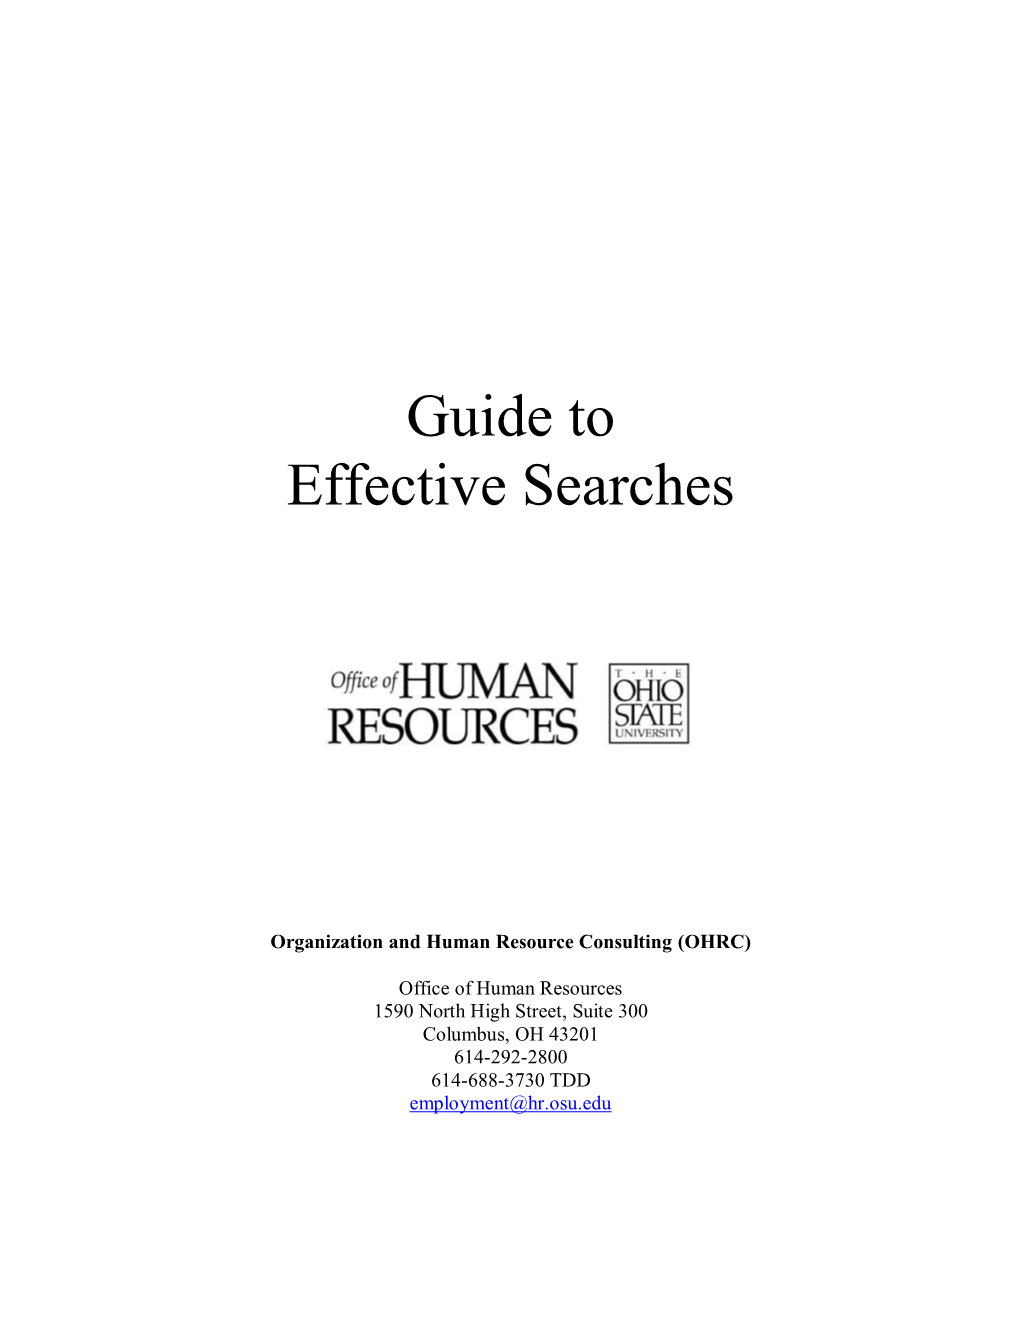 Guide to Effective Searches